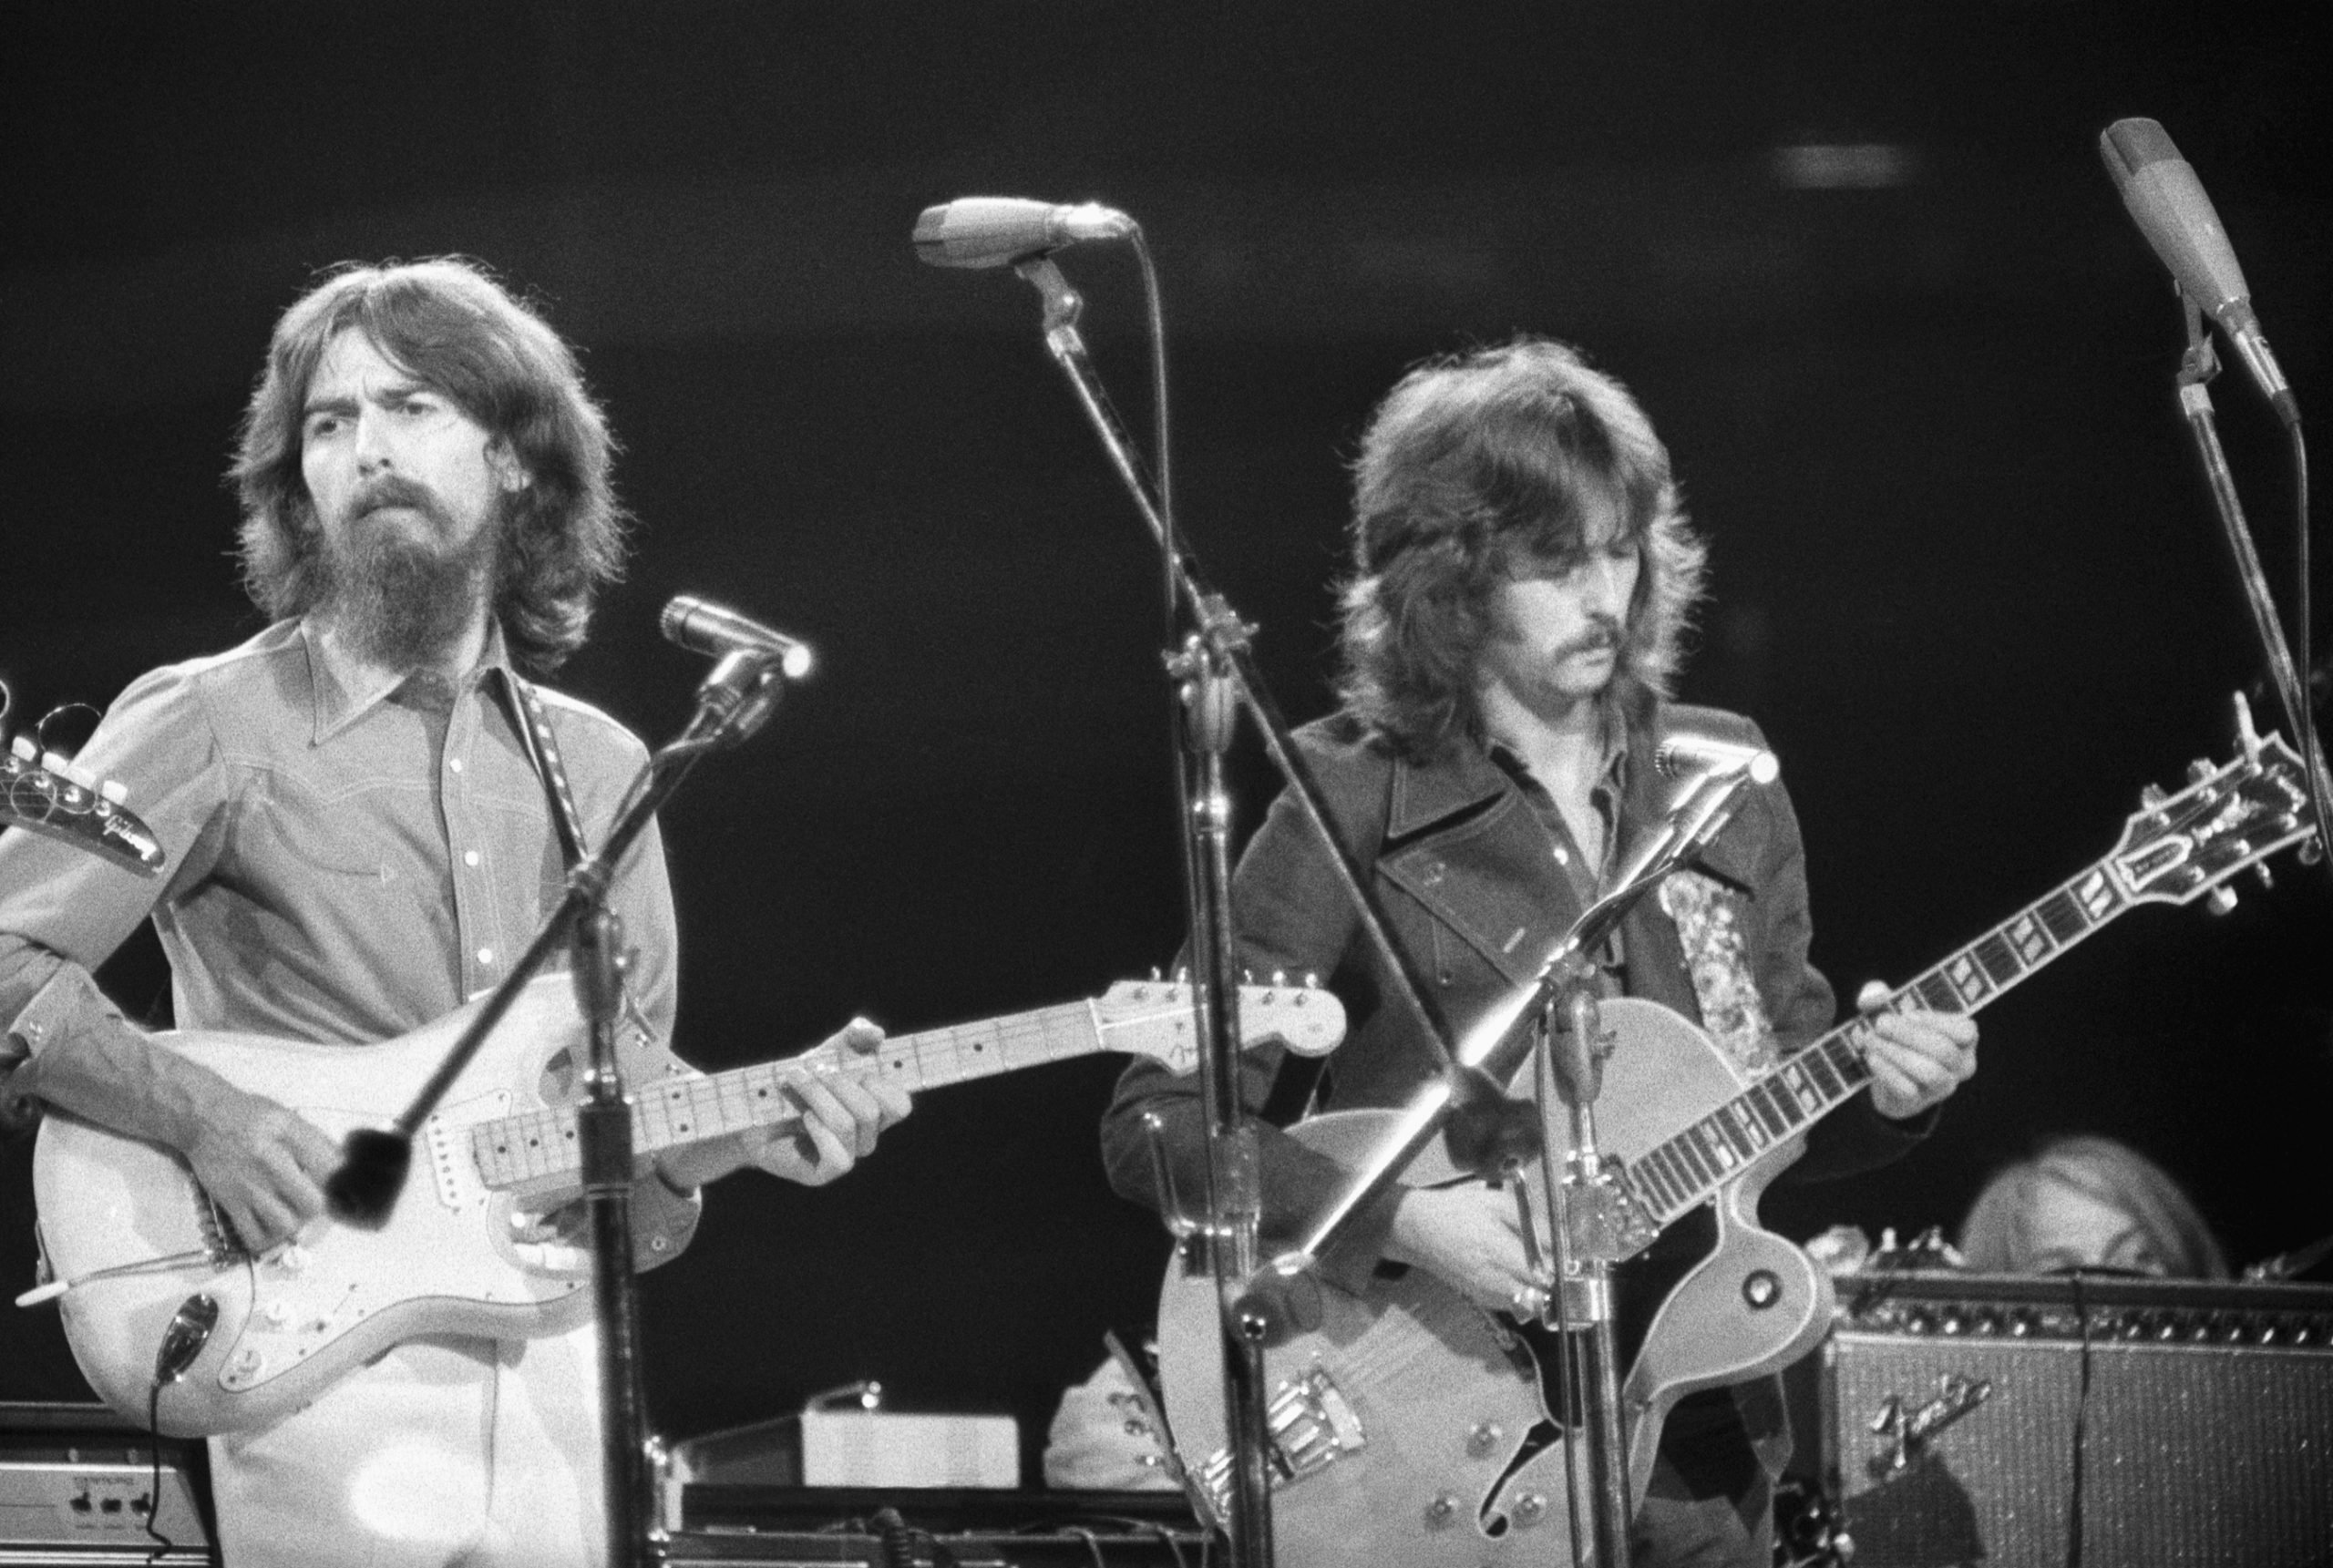 George Harrison and Eric Clapton performing at the Concert for Bangladesh at Madison Square Garden